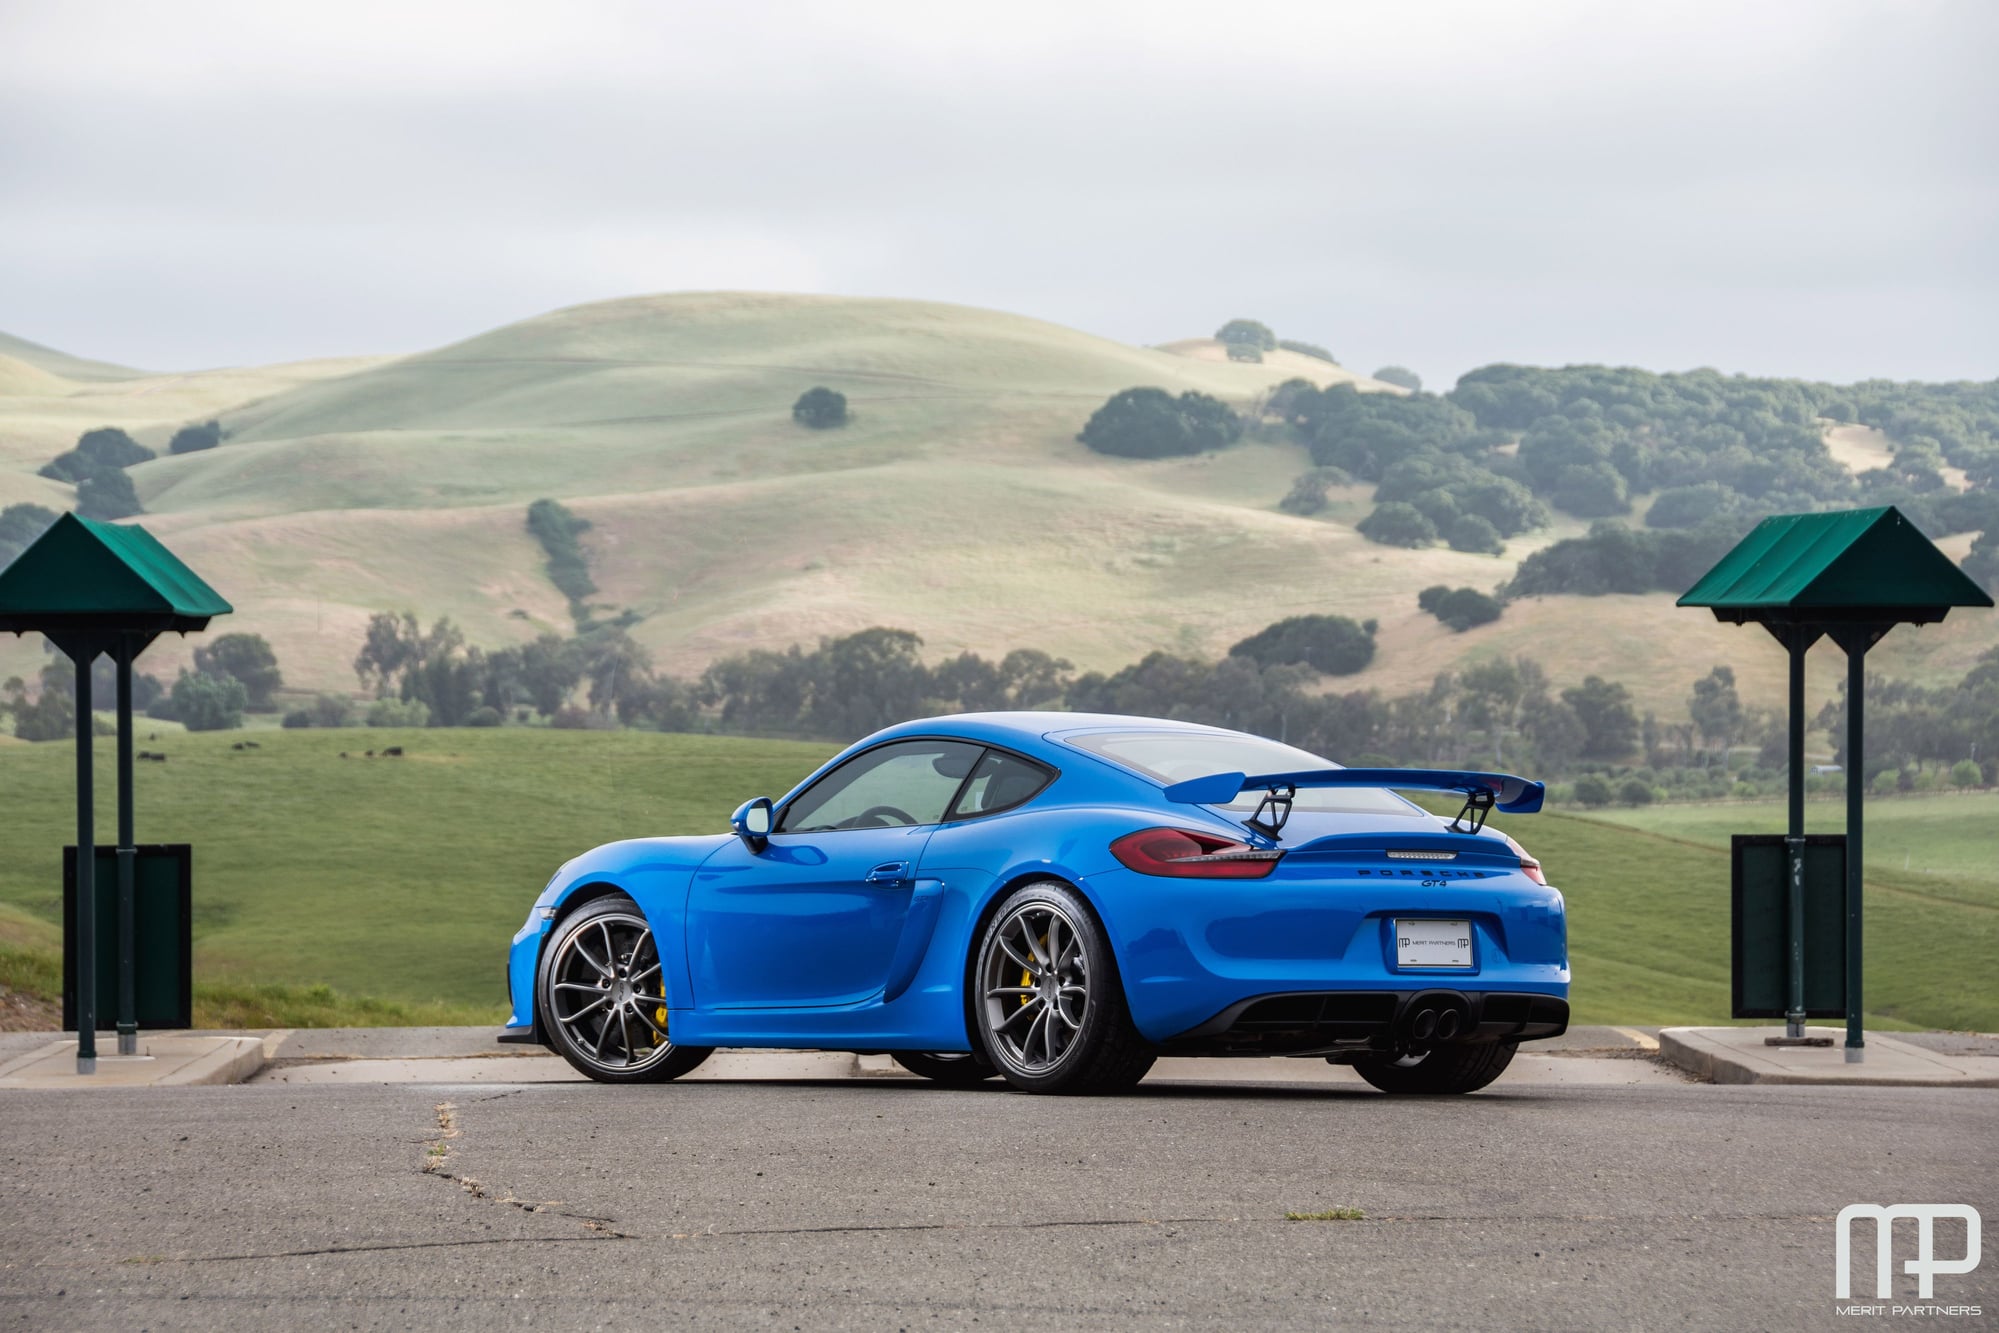 2016 Porsche Cayman GT4 - 2016 Porsche Cayman GT4 Paint-to-Sample Voodoo Blue - Used - VIN WP0AC2A84GK191576 - 970 Miles - 6 cyl - 2WD - Manual - Coupe - Blue - Atlanta, GA 30360, United States